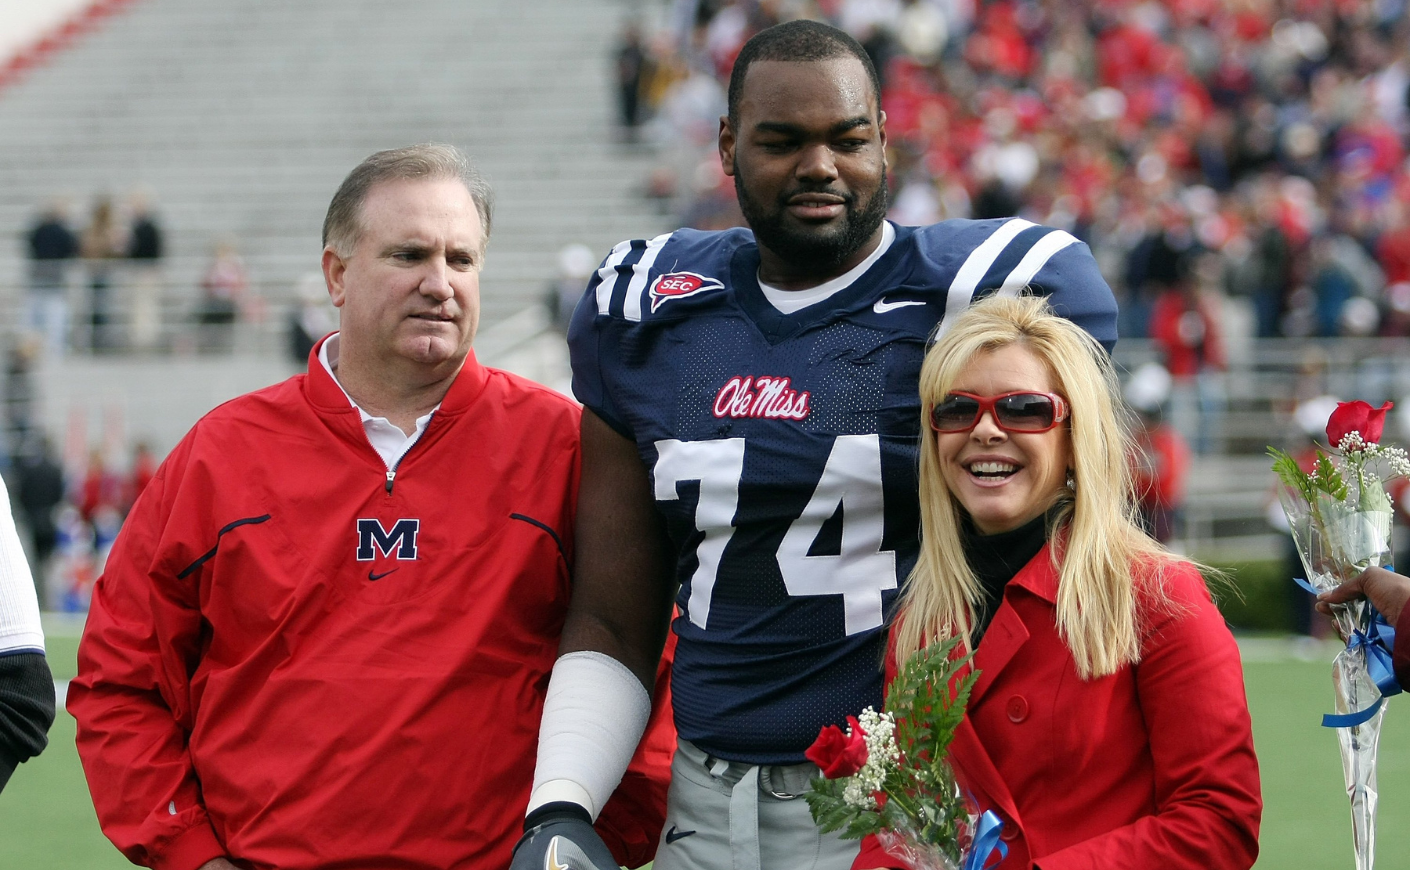 Michael Oher with the Tuohy family on a football field